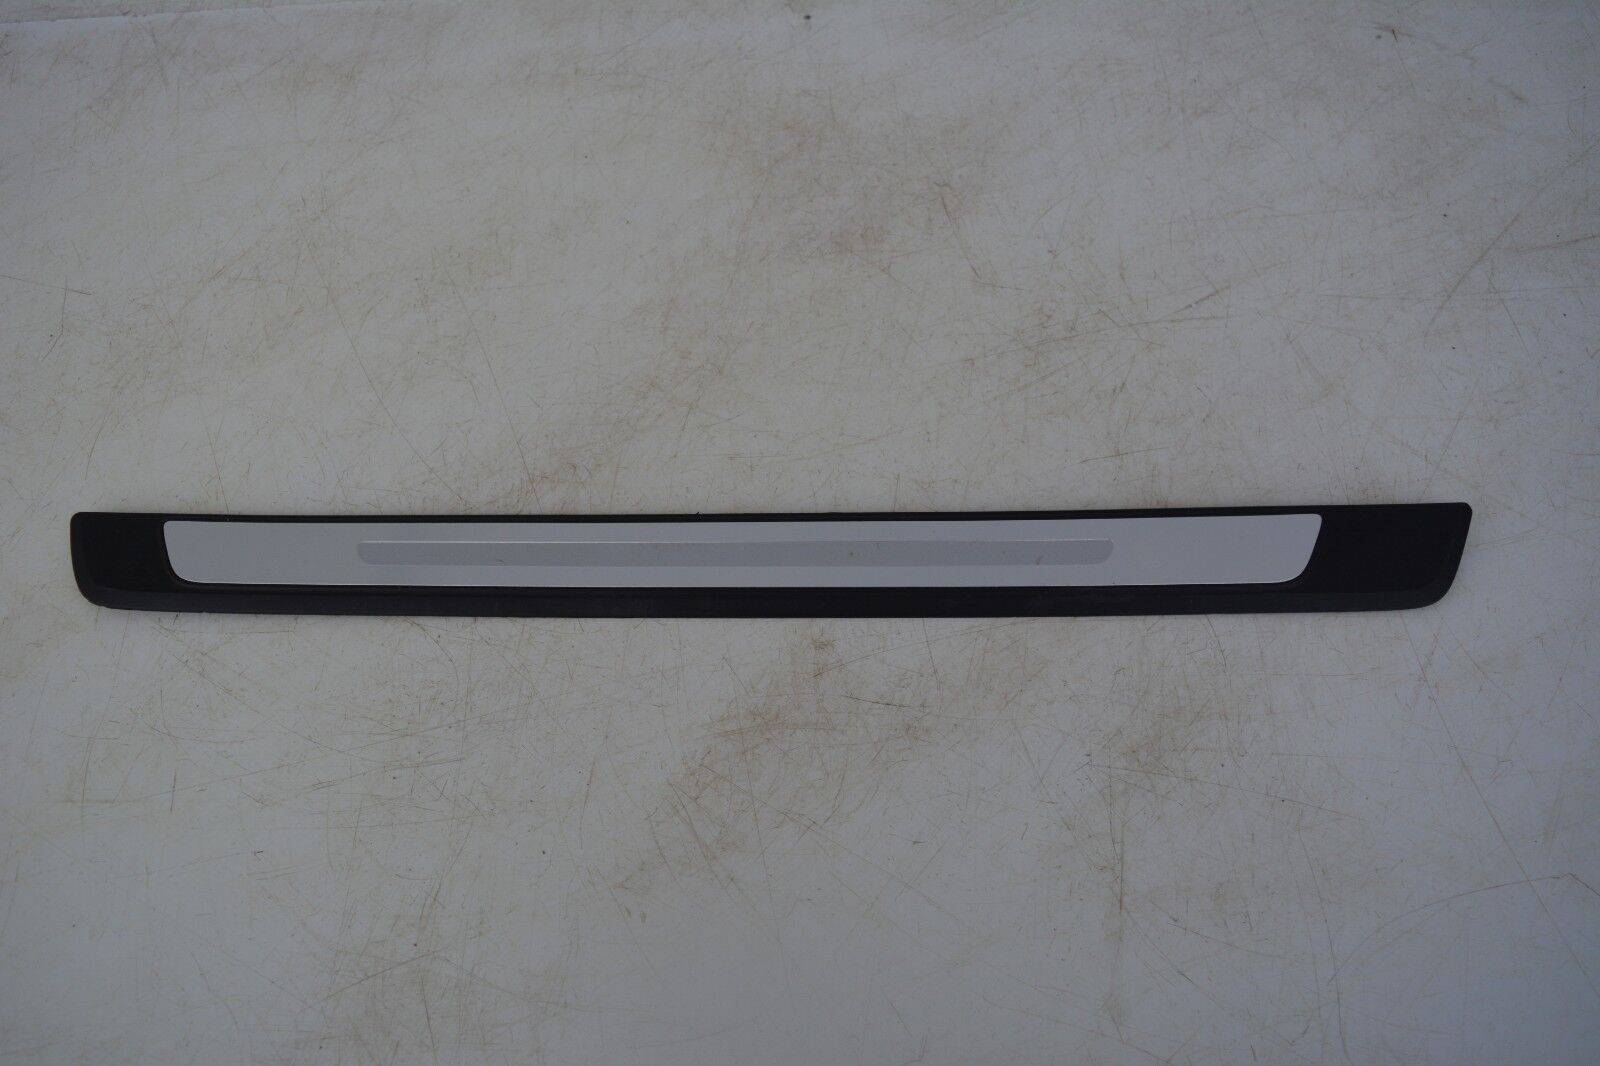 Audi-A4-Door-Sill-Entry-Trim-Front-Left-8W0853373F-Genuine-176469540383